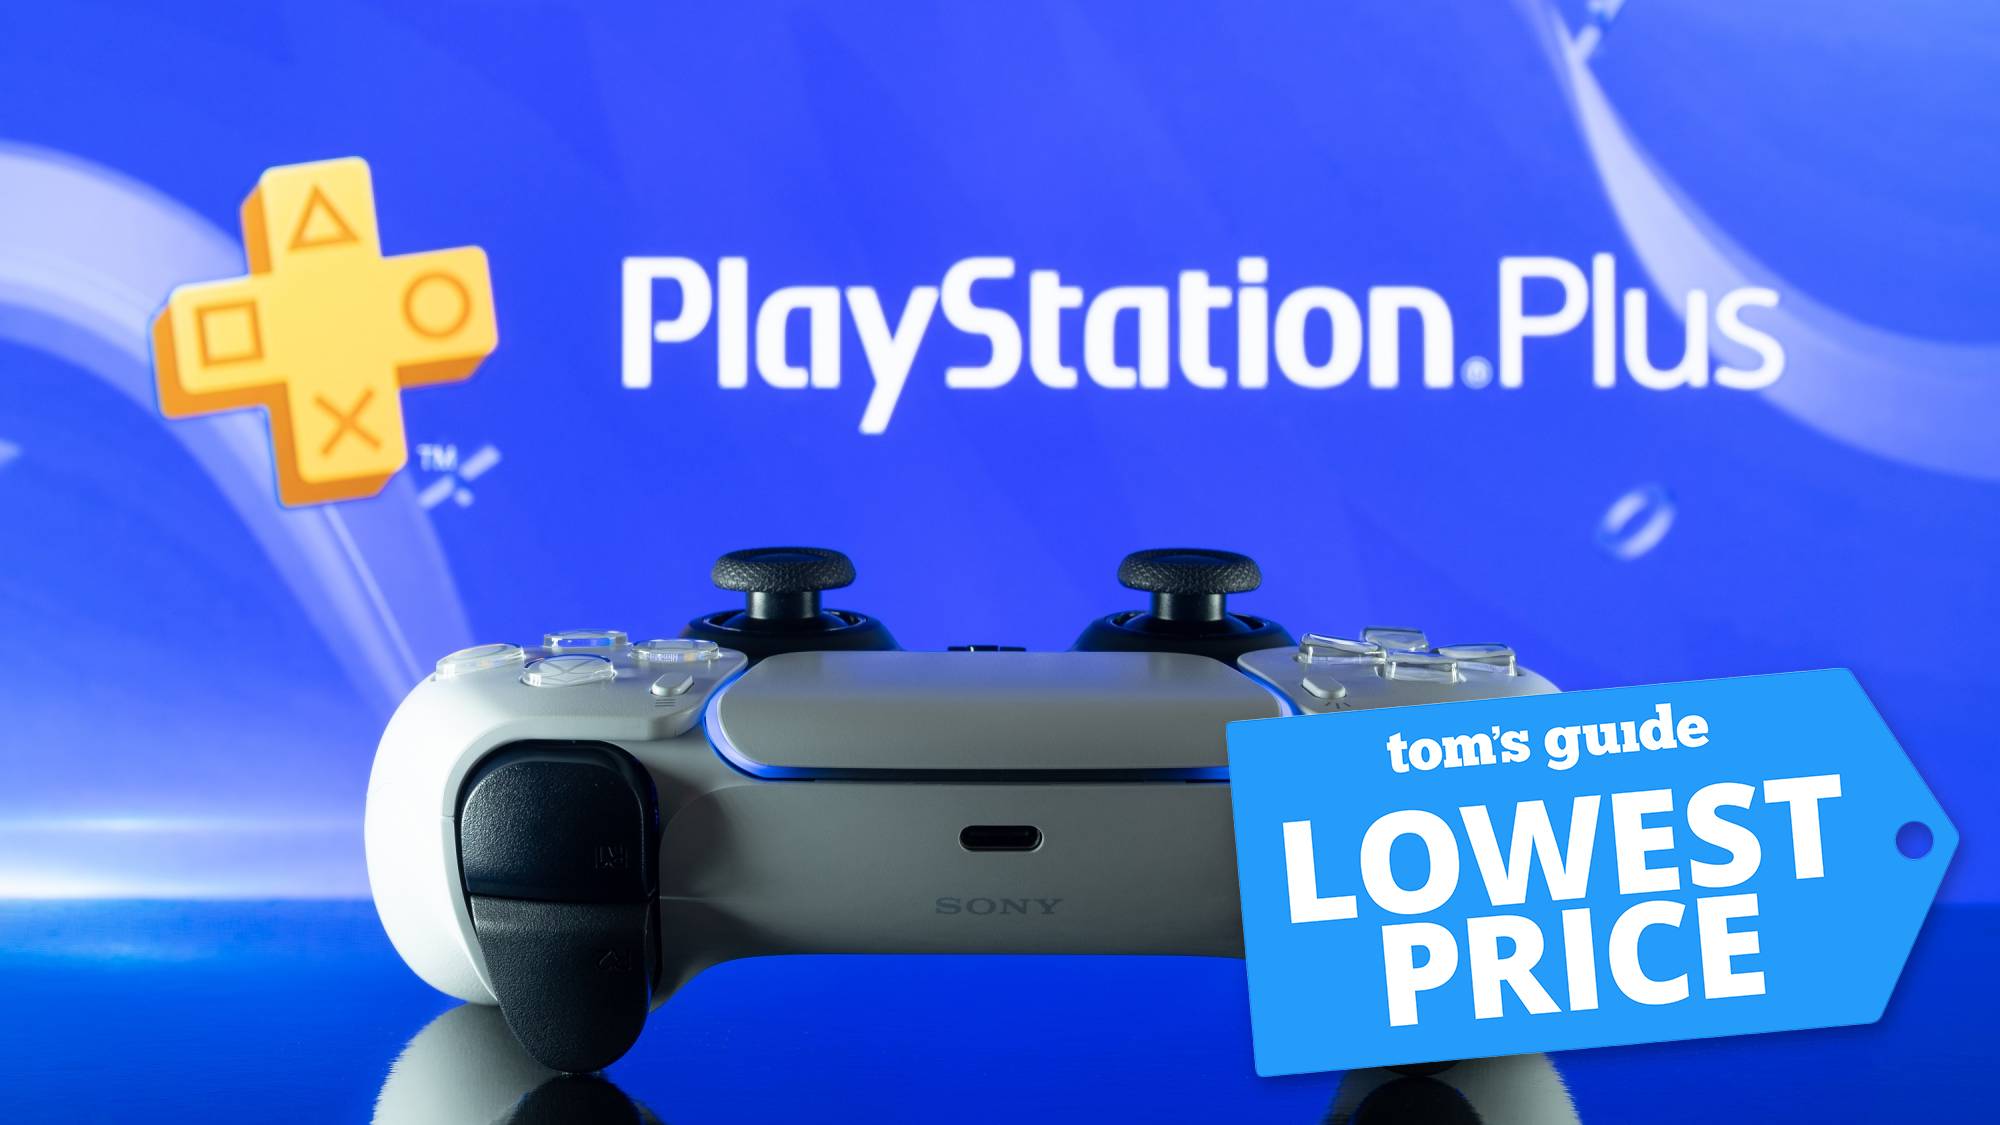 PlayStation Black Friday deals include $29.99 PS Plus subscription